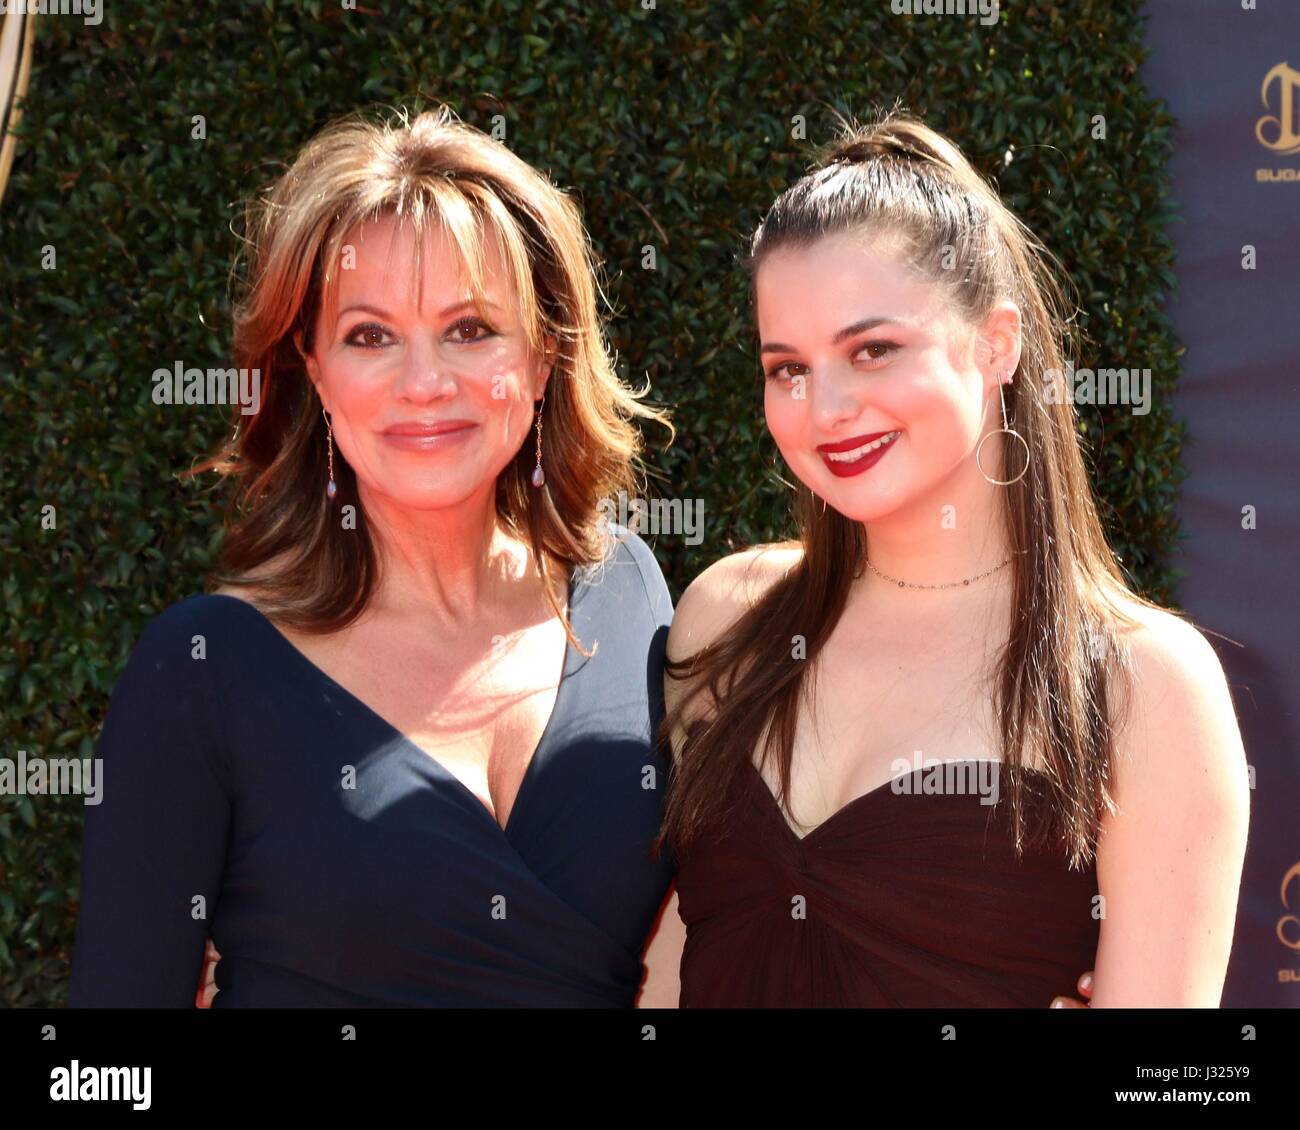 Pasadena, CA. 30th Apr, 2017. Nancy Lee Grahn, Katherine Grahn at arrivals for 44th Annual Daytime Emmy Awards - Arrivals 1, Pasadena Civic Center, Pasadena, CA April 30, 2017. Credit: Priscilla Grant/Everett Collection/Alamy Live News Stock Photo